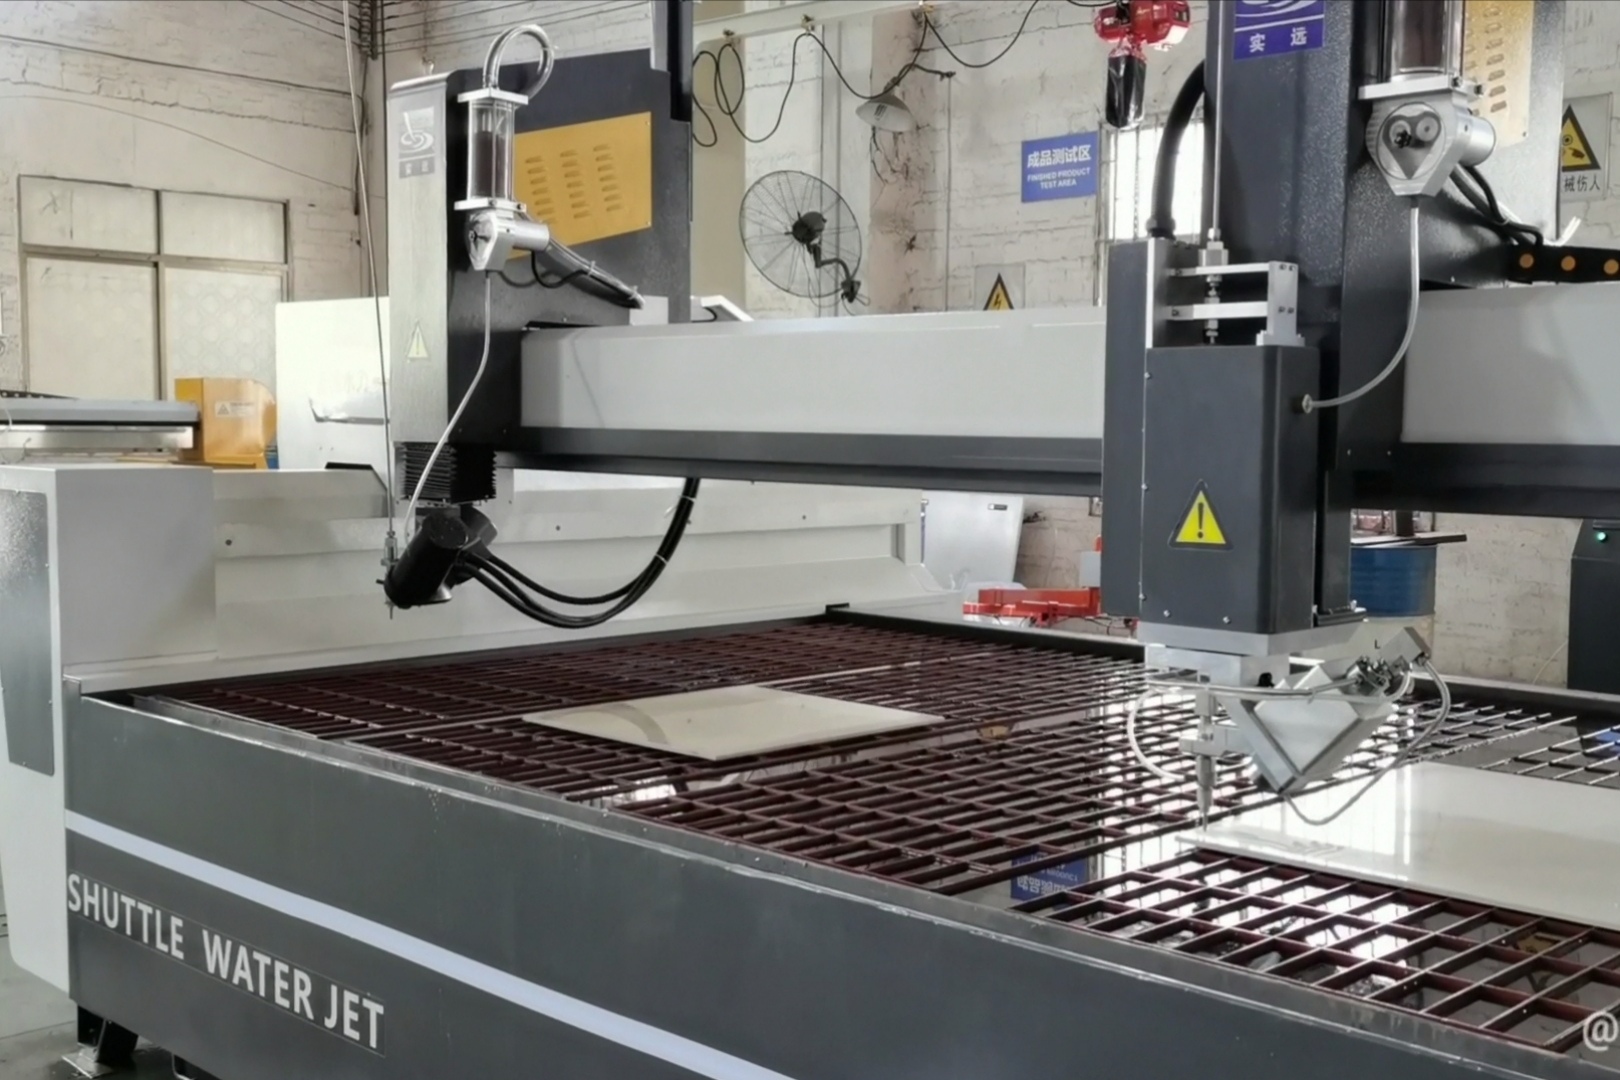 How much do you know about water jet cutter